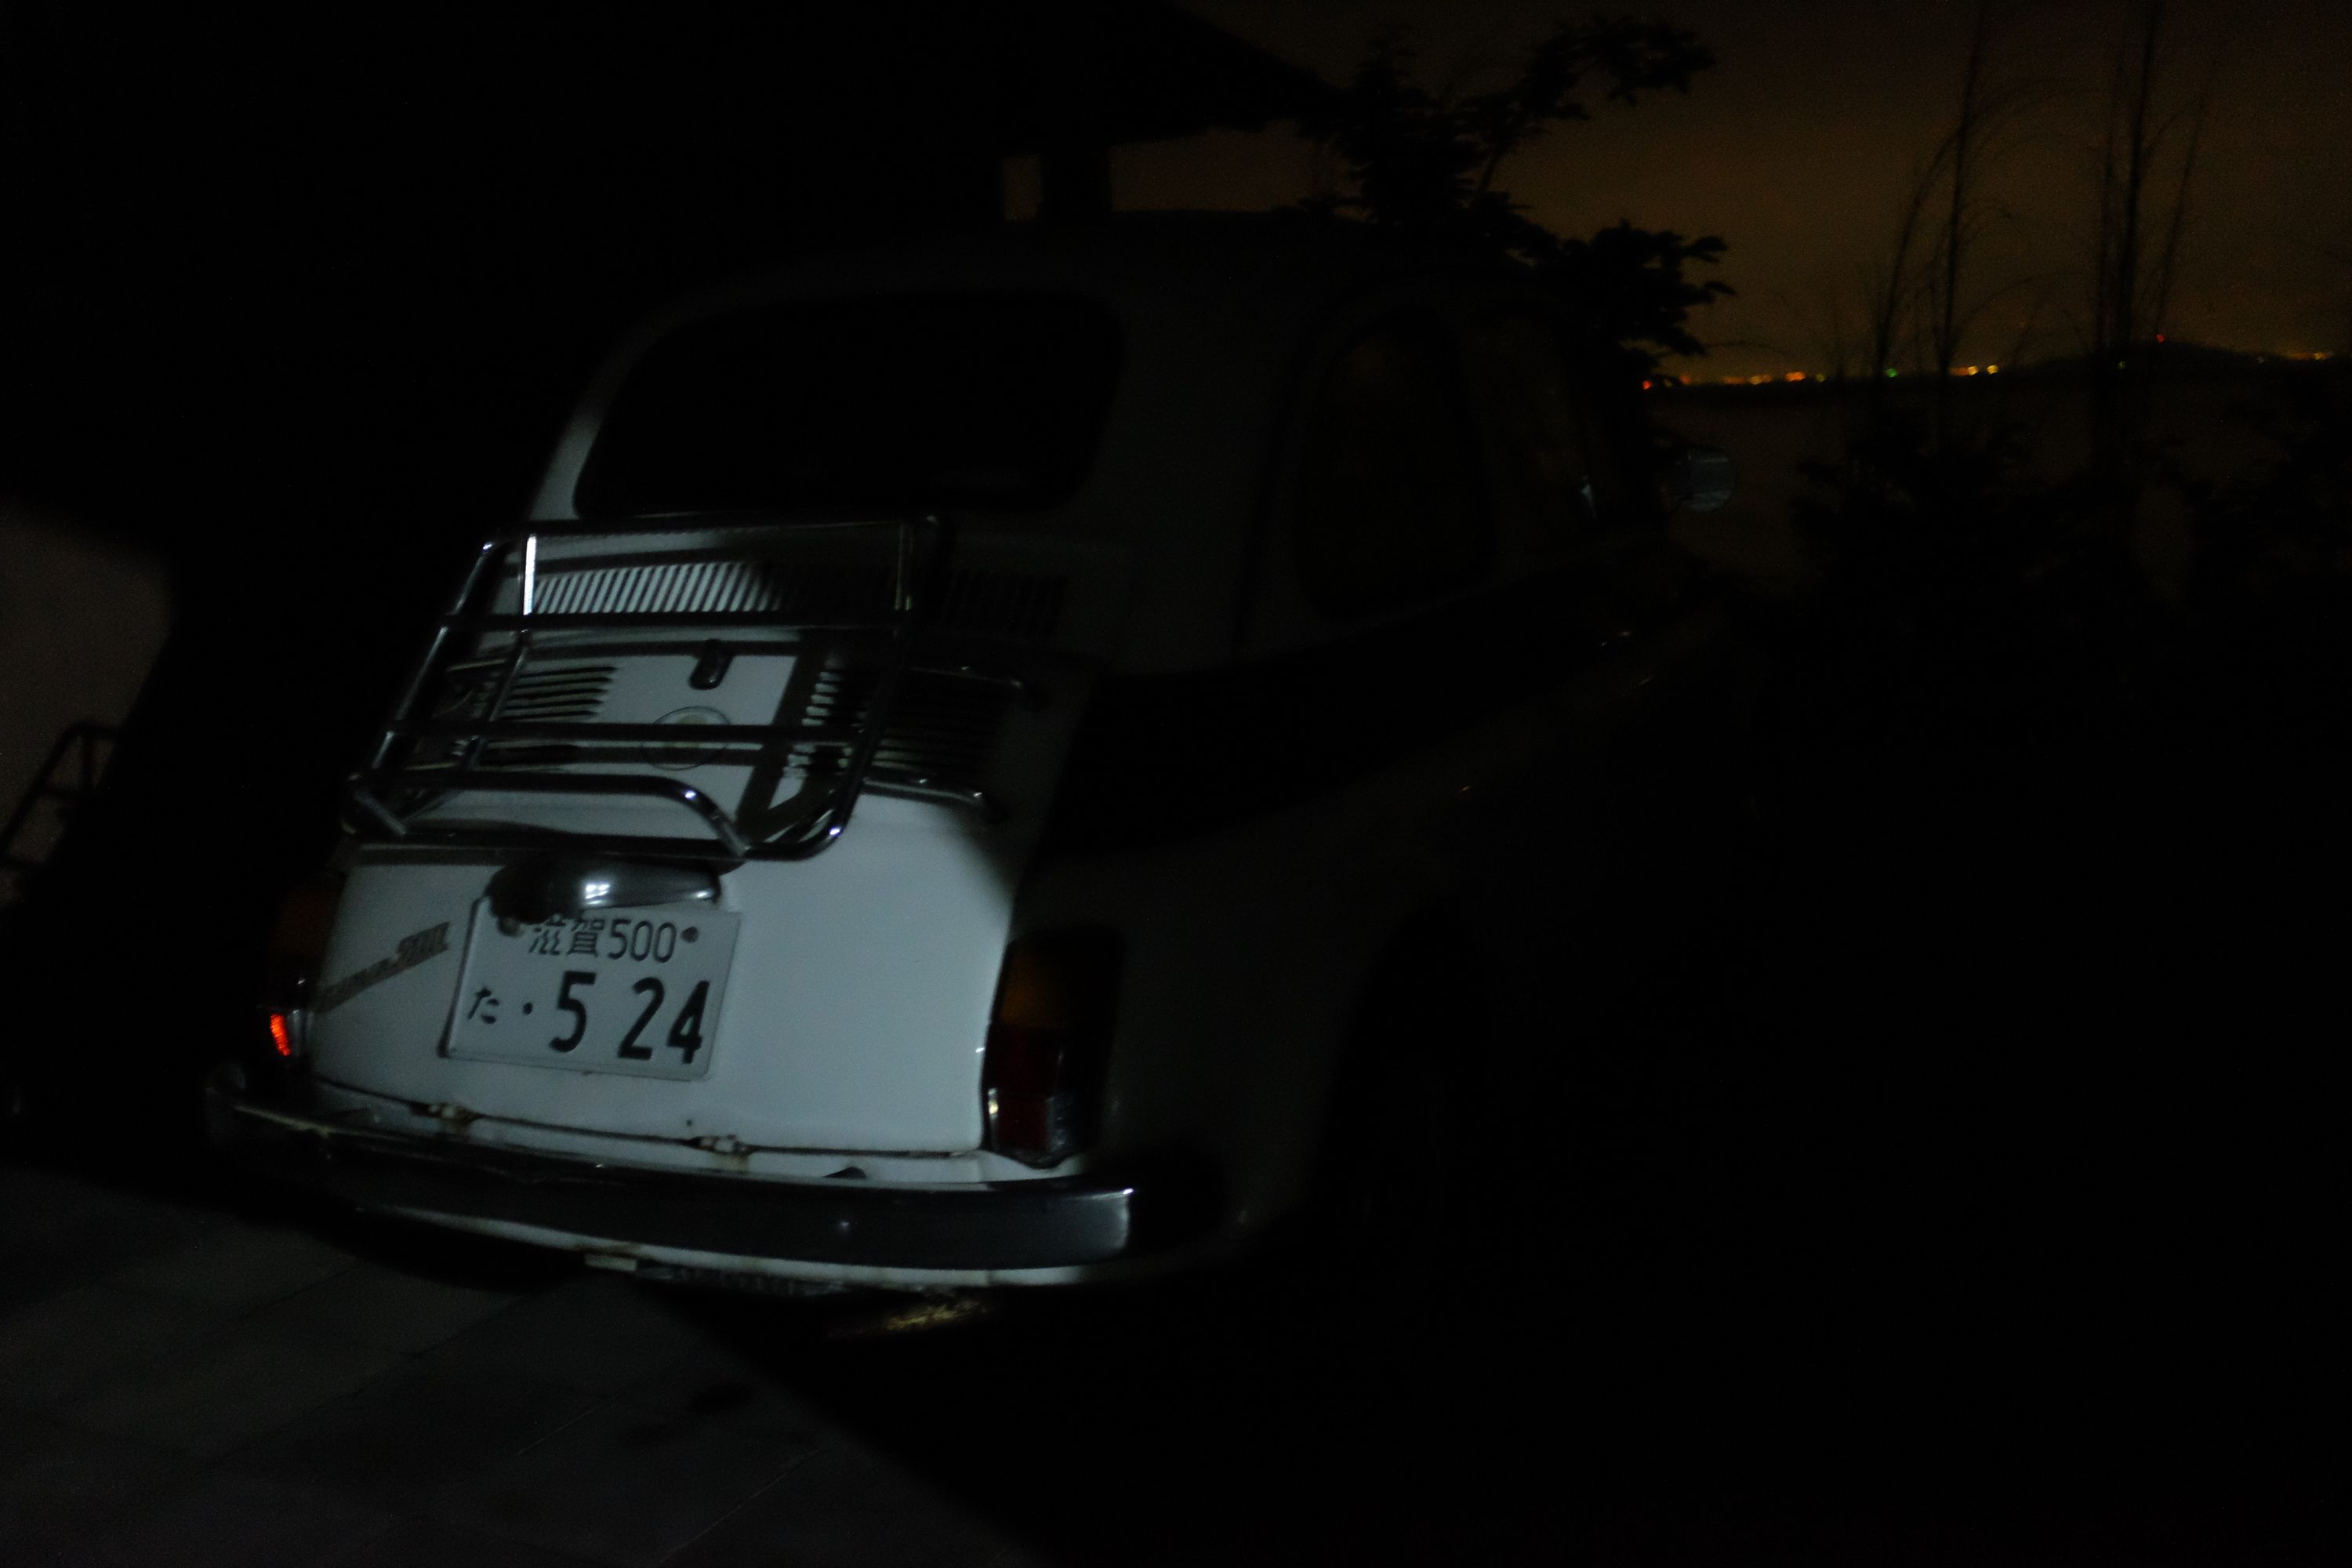 The rear end of a vintage white Fiat 500 is lit by a streetlamp, it is otherwise dark and there are distant lights on the horizon.